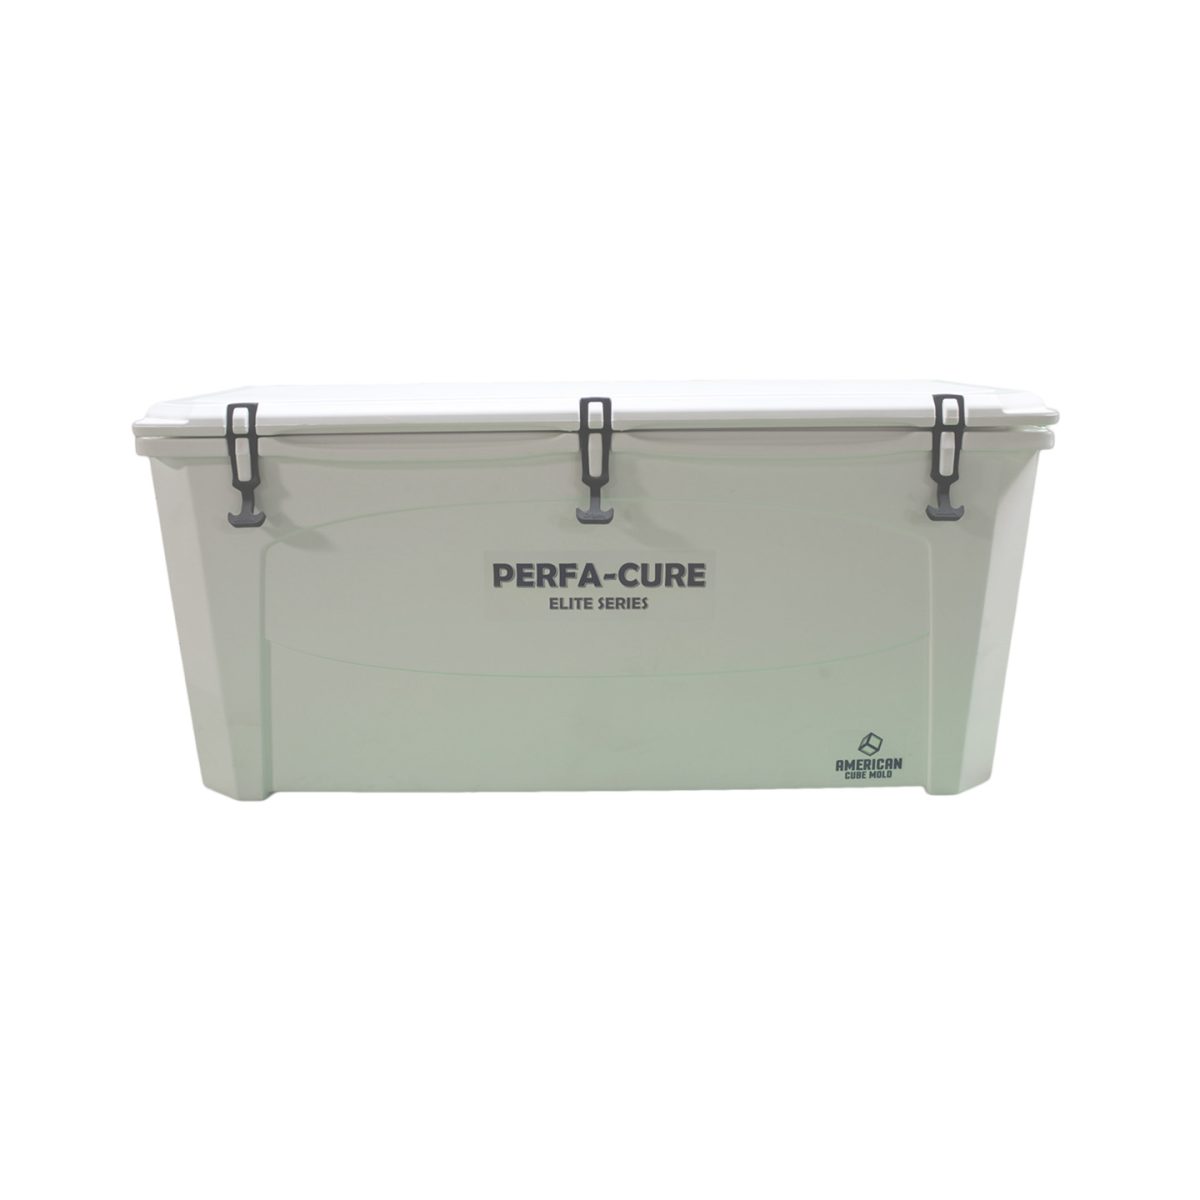 Perfa-Cure Elite Curing Box (Heats Only)